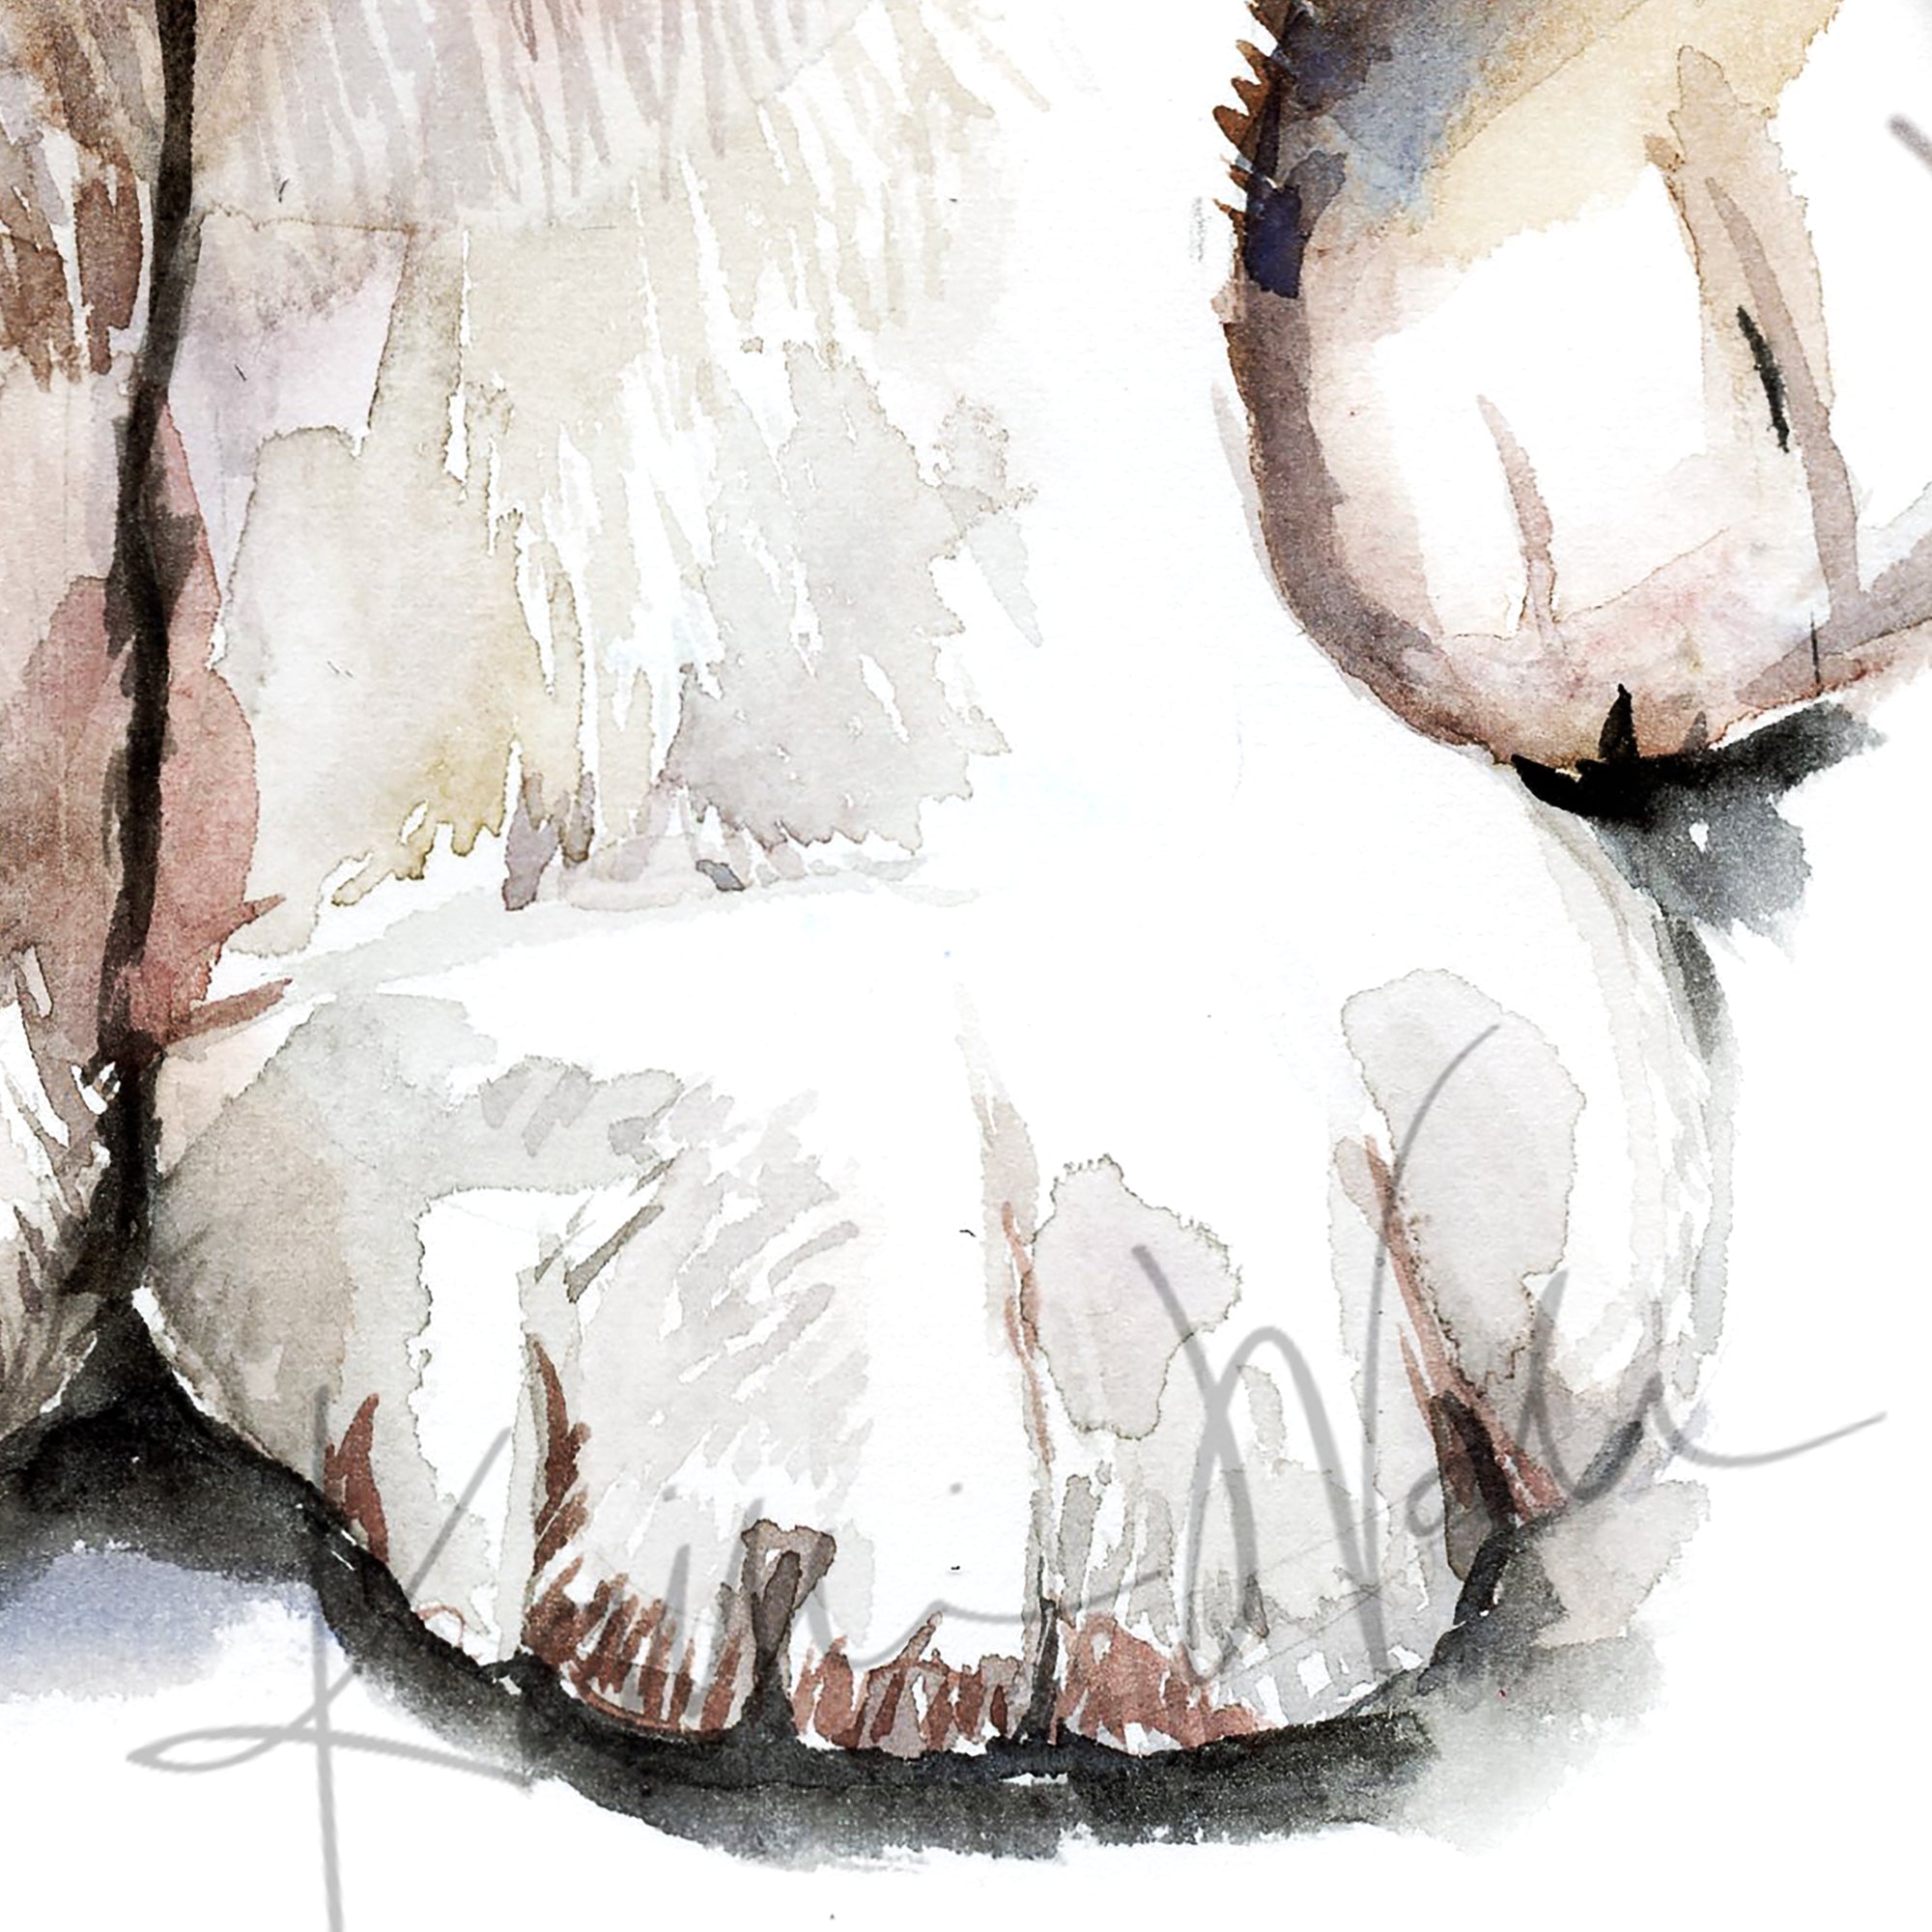 Zoomed in watercolor painting of a cat paw. The cat is gray, tan, and white.